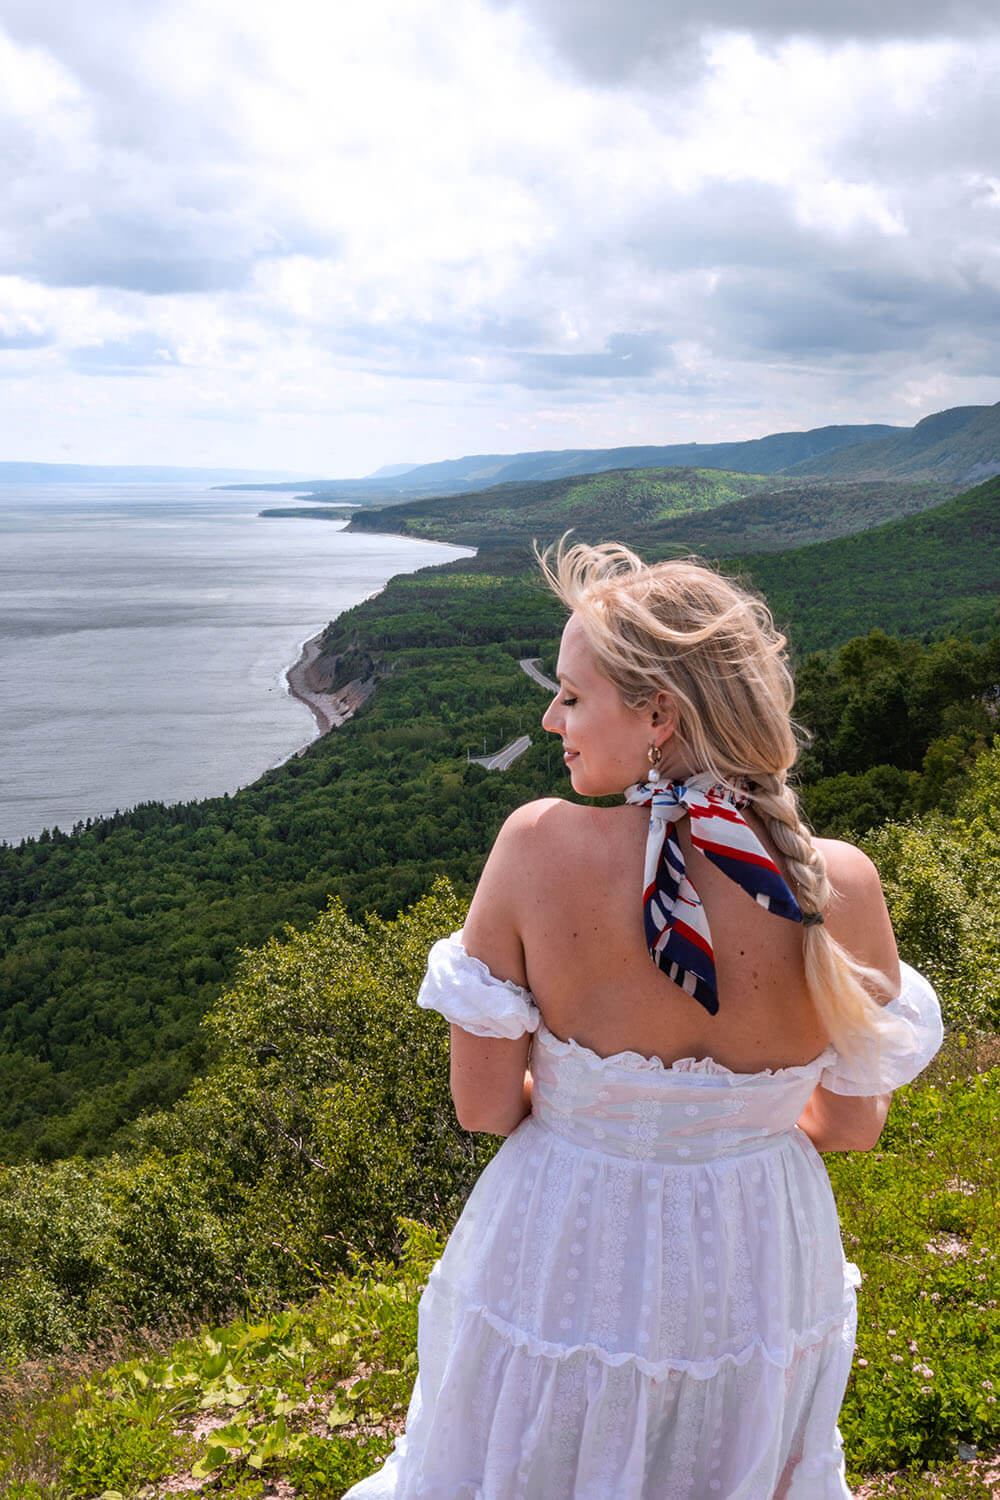 Planning a trip to Cape Breton soon? This guide includes all of the best things to do in Cape Breton Island! From activities and attractions, to the top restaurants, hikes, and all the things you'll want to see along the famous Cabot Trial. You won't want to miss this guide that will help you plan the perfect getaway to Cape Breton. Click for the full list. Pictured here: Cape Smokey Lookout